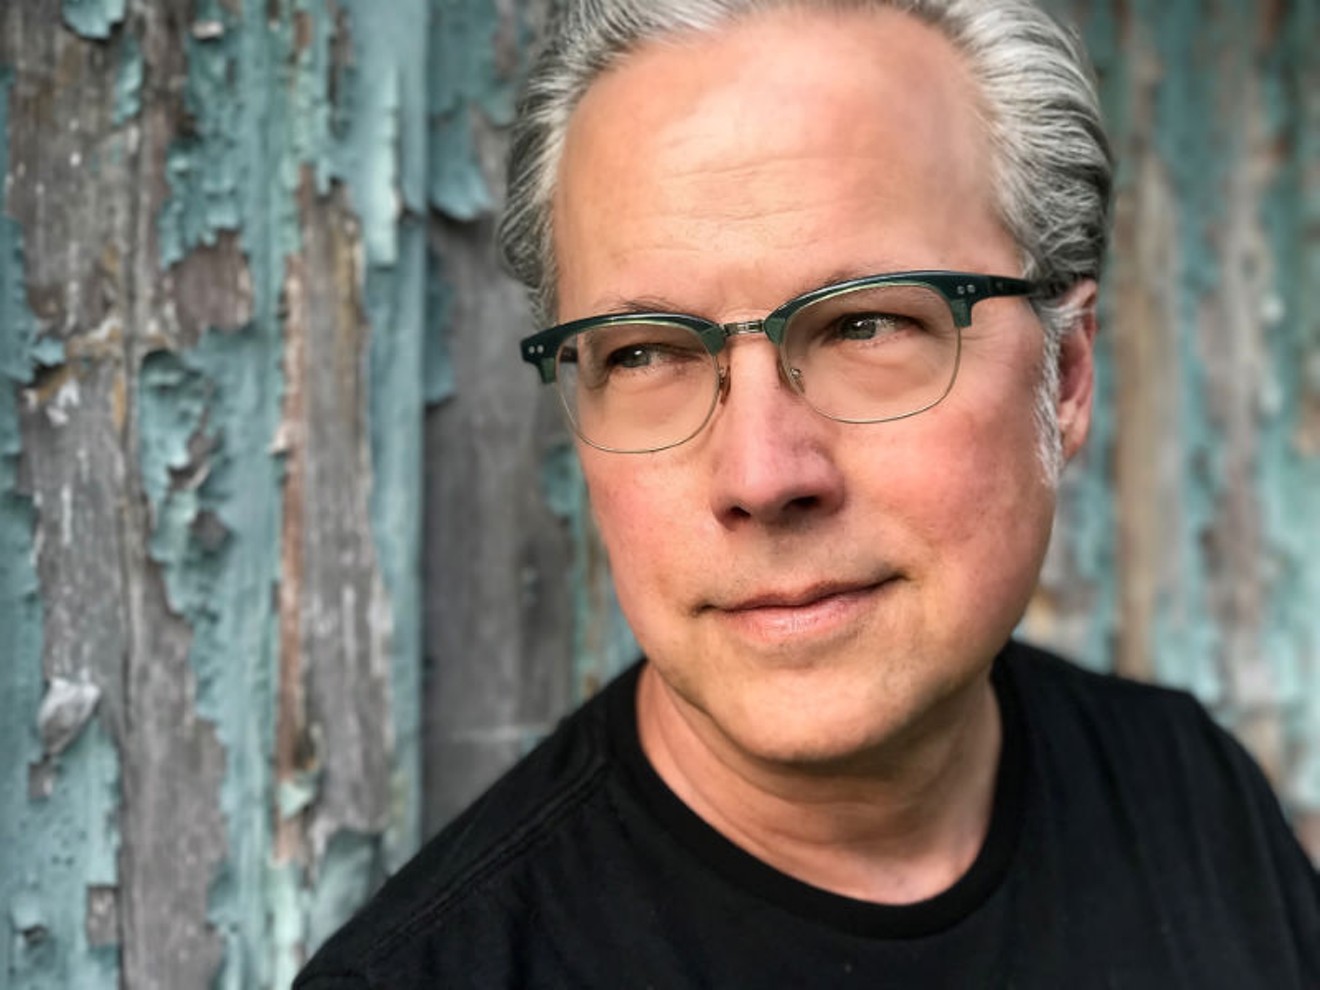 Singer, songwriter and author, Radney Foster